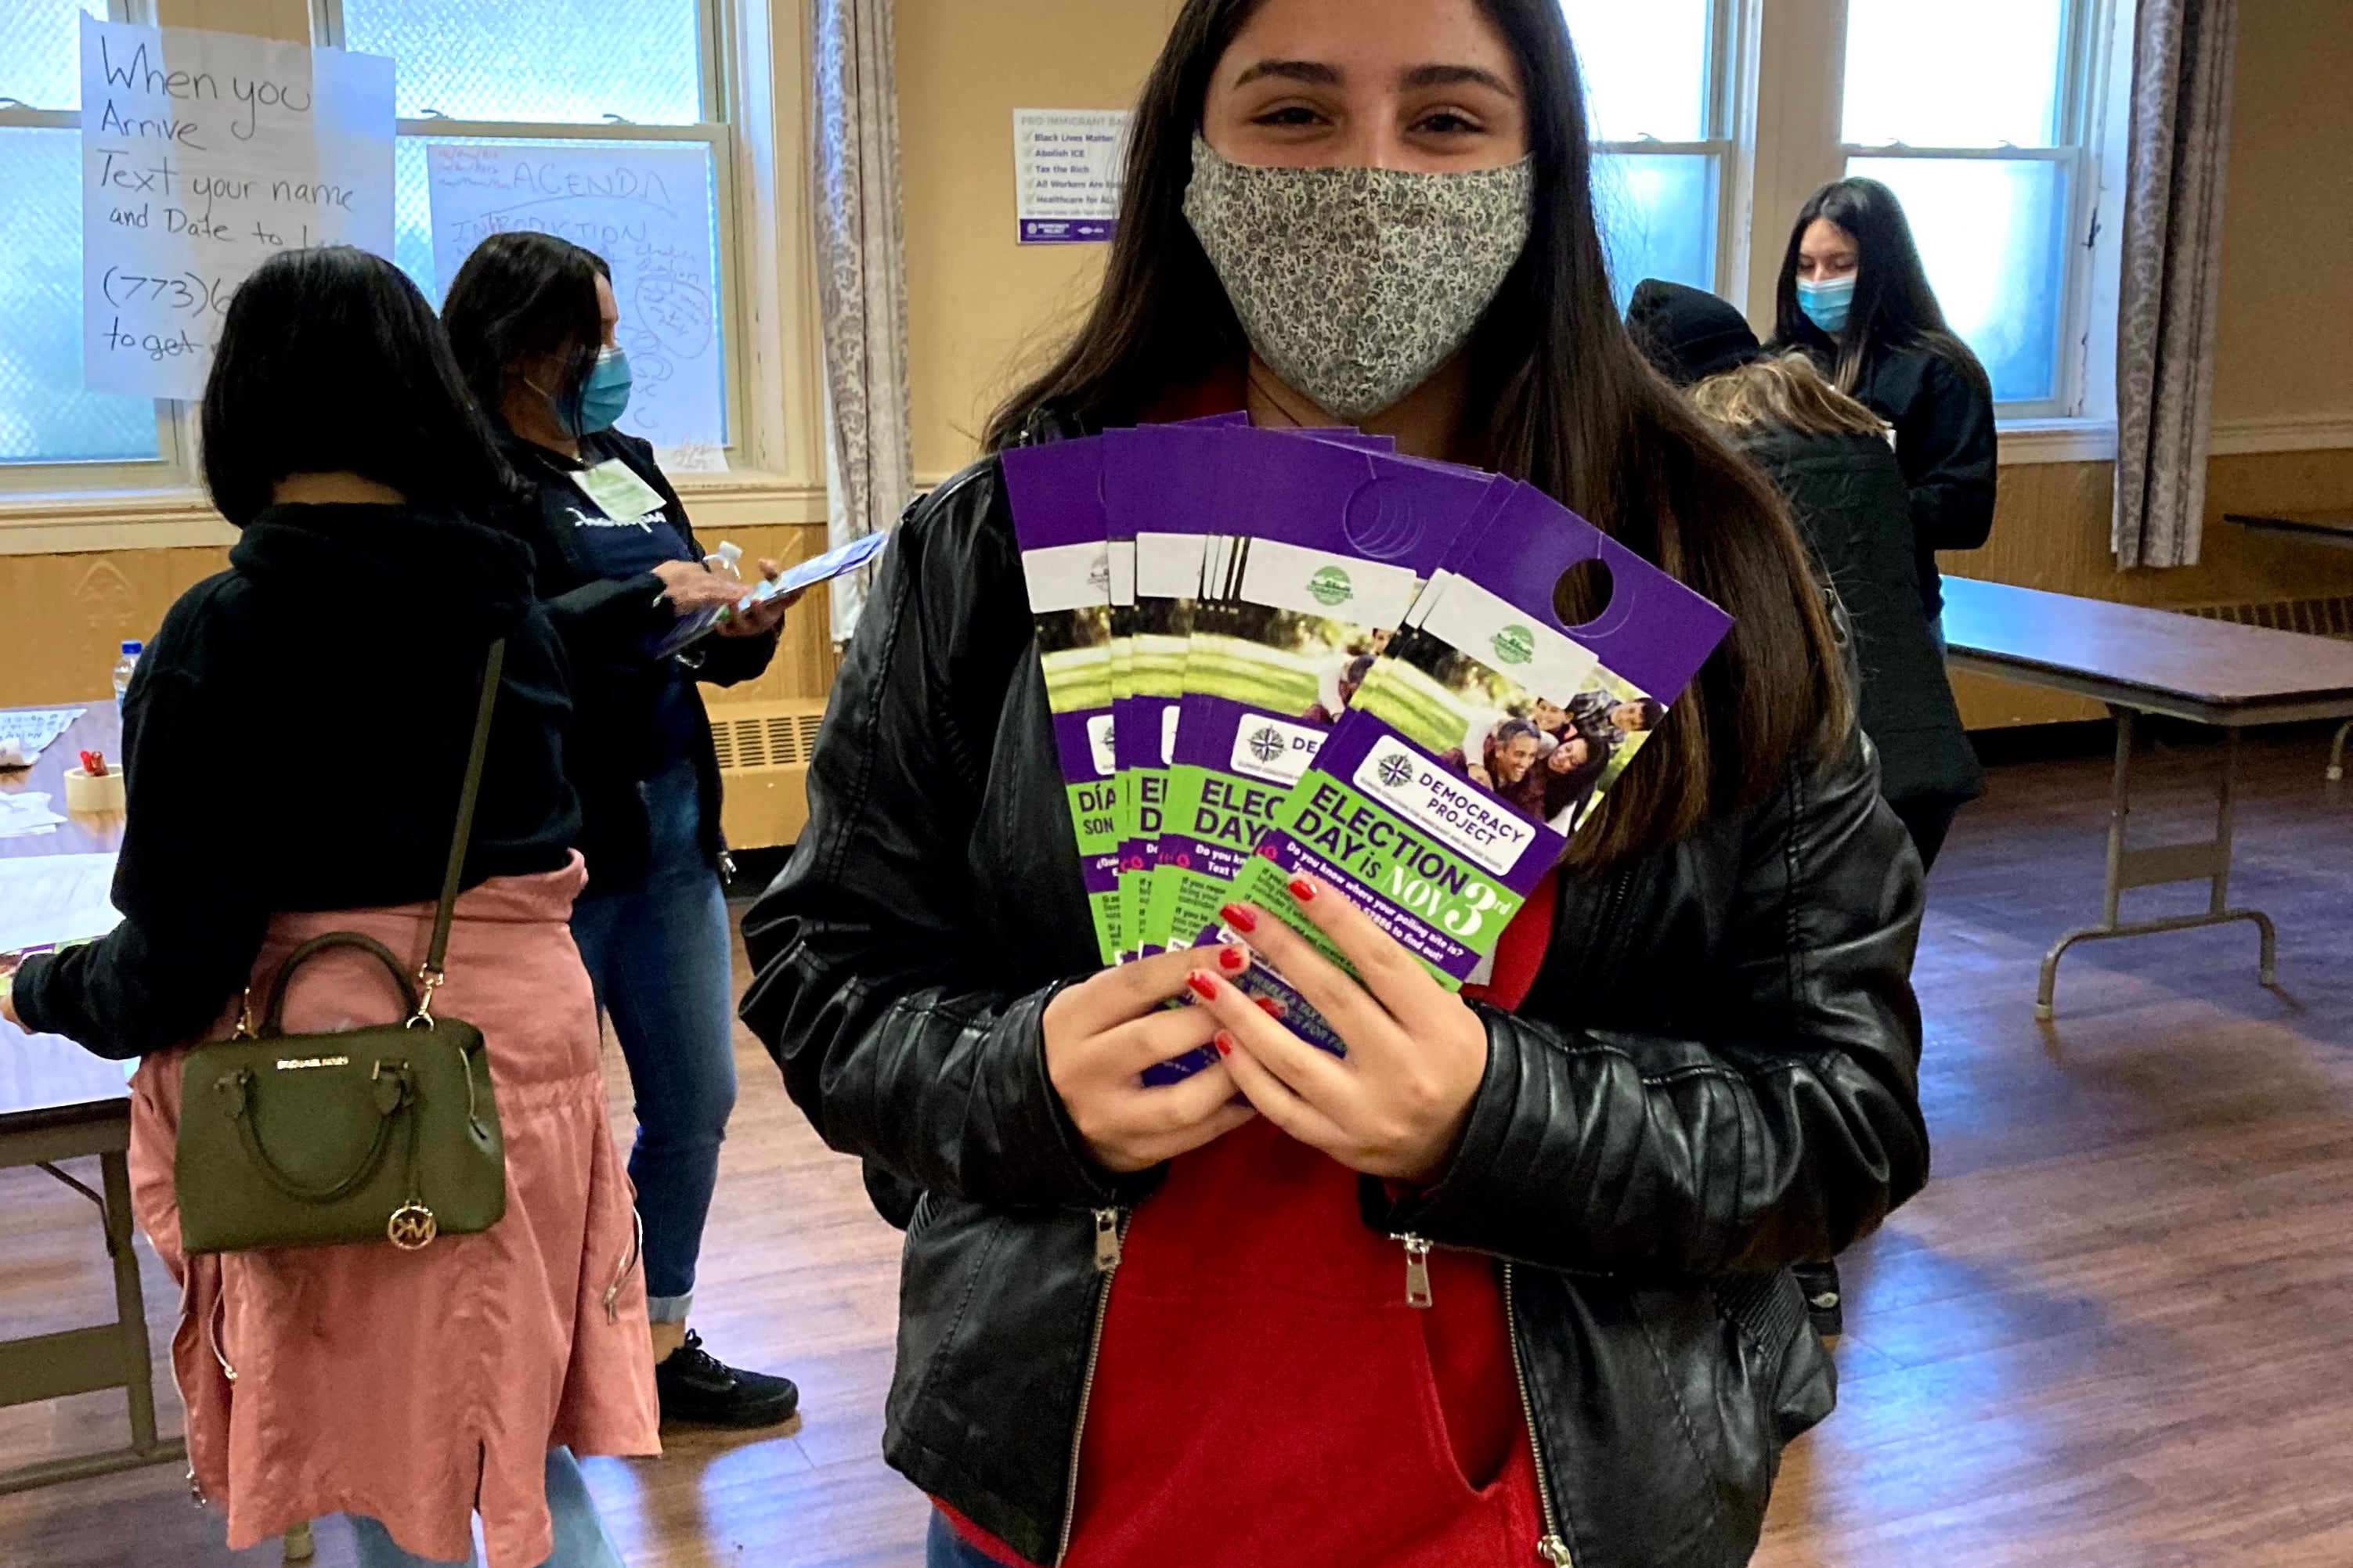 Chicago high school junior Alexa Valenzuela drops off get-out-the-vote literature in Albany Park on Nov. 3, 2020. The community organization Communities United partnered with several Chicago high schools on the effort.